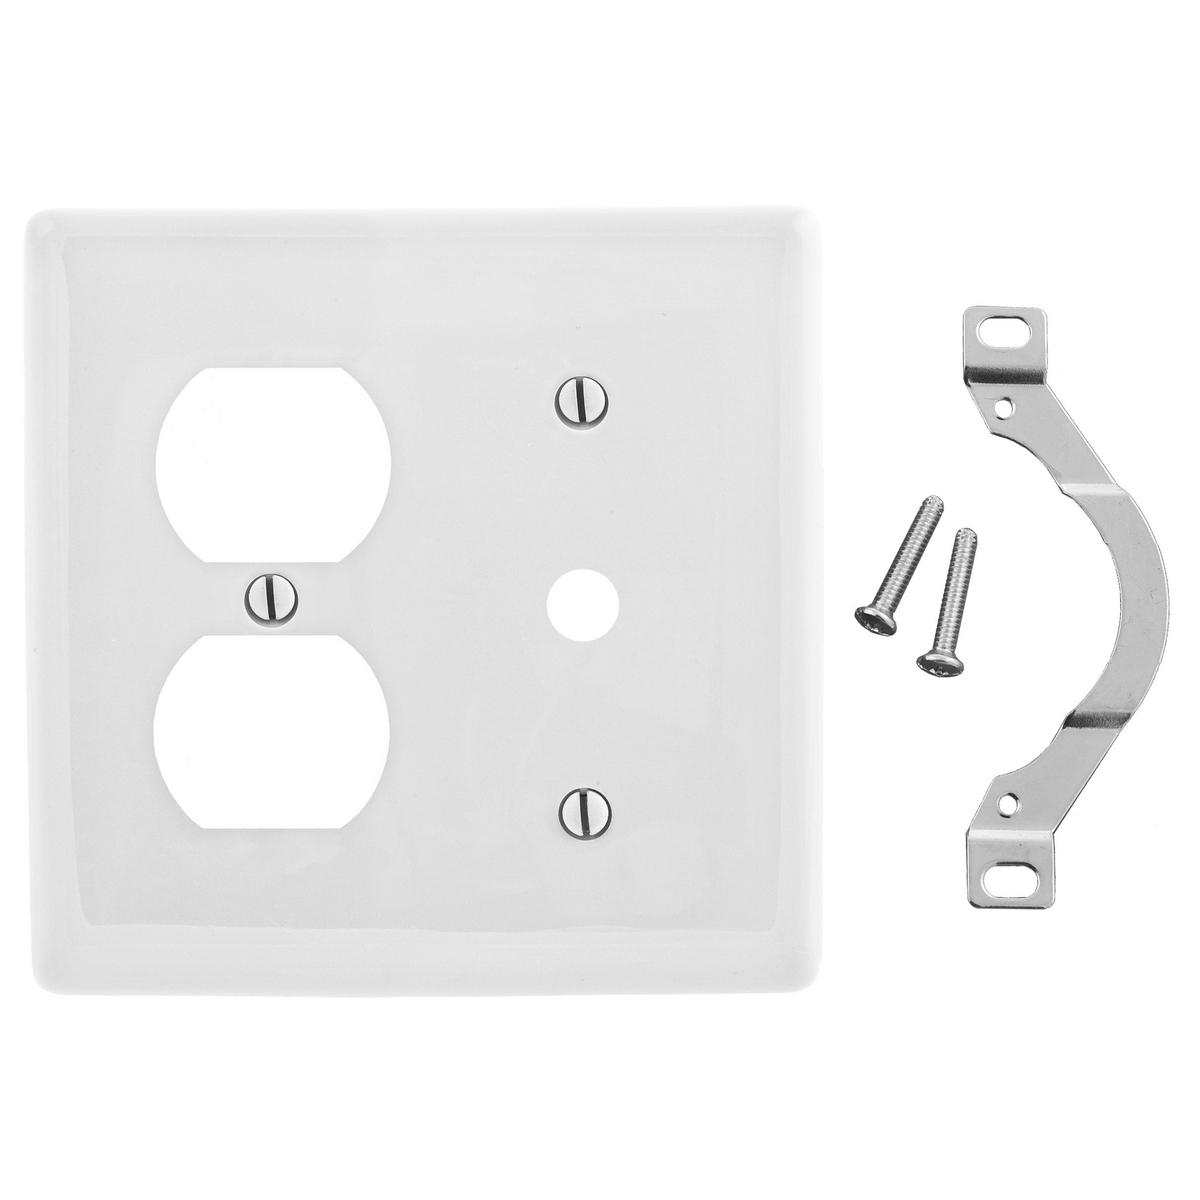 Hubbell NP128W Wallplates, Nylon, 2-Gang, 1) Duplex, 1).406" Opening, White  ; Reinforcement ribs for extra strength ; High-impact, self-extinguishing nylon material ; Captive screw feature holds mounting screw in place ; Standard Size is 1/8" larger to give you extra c